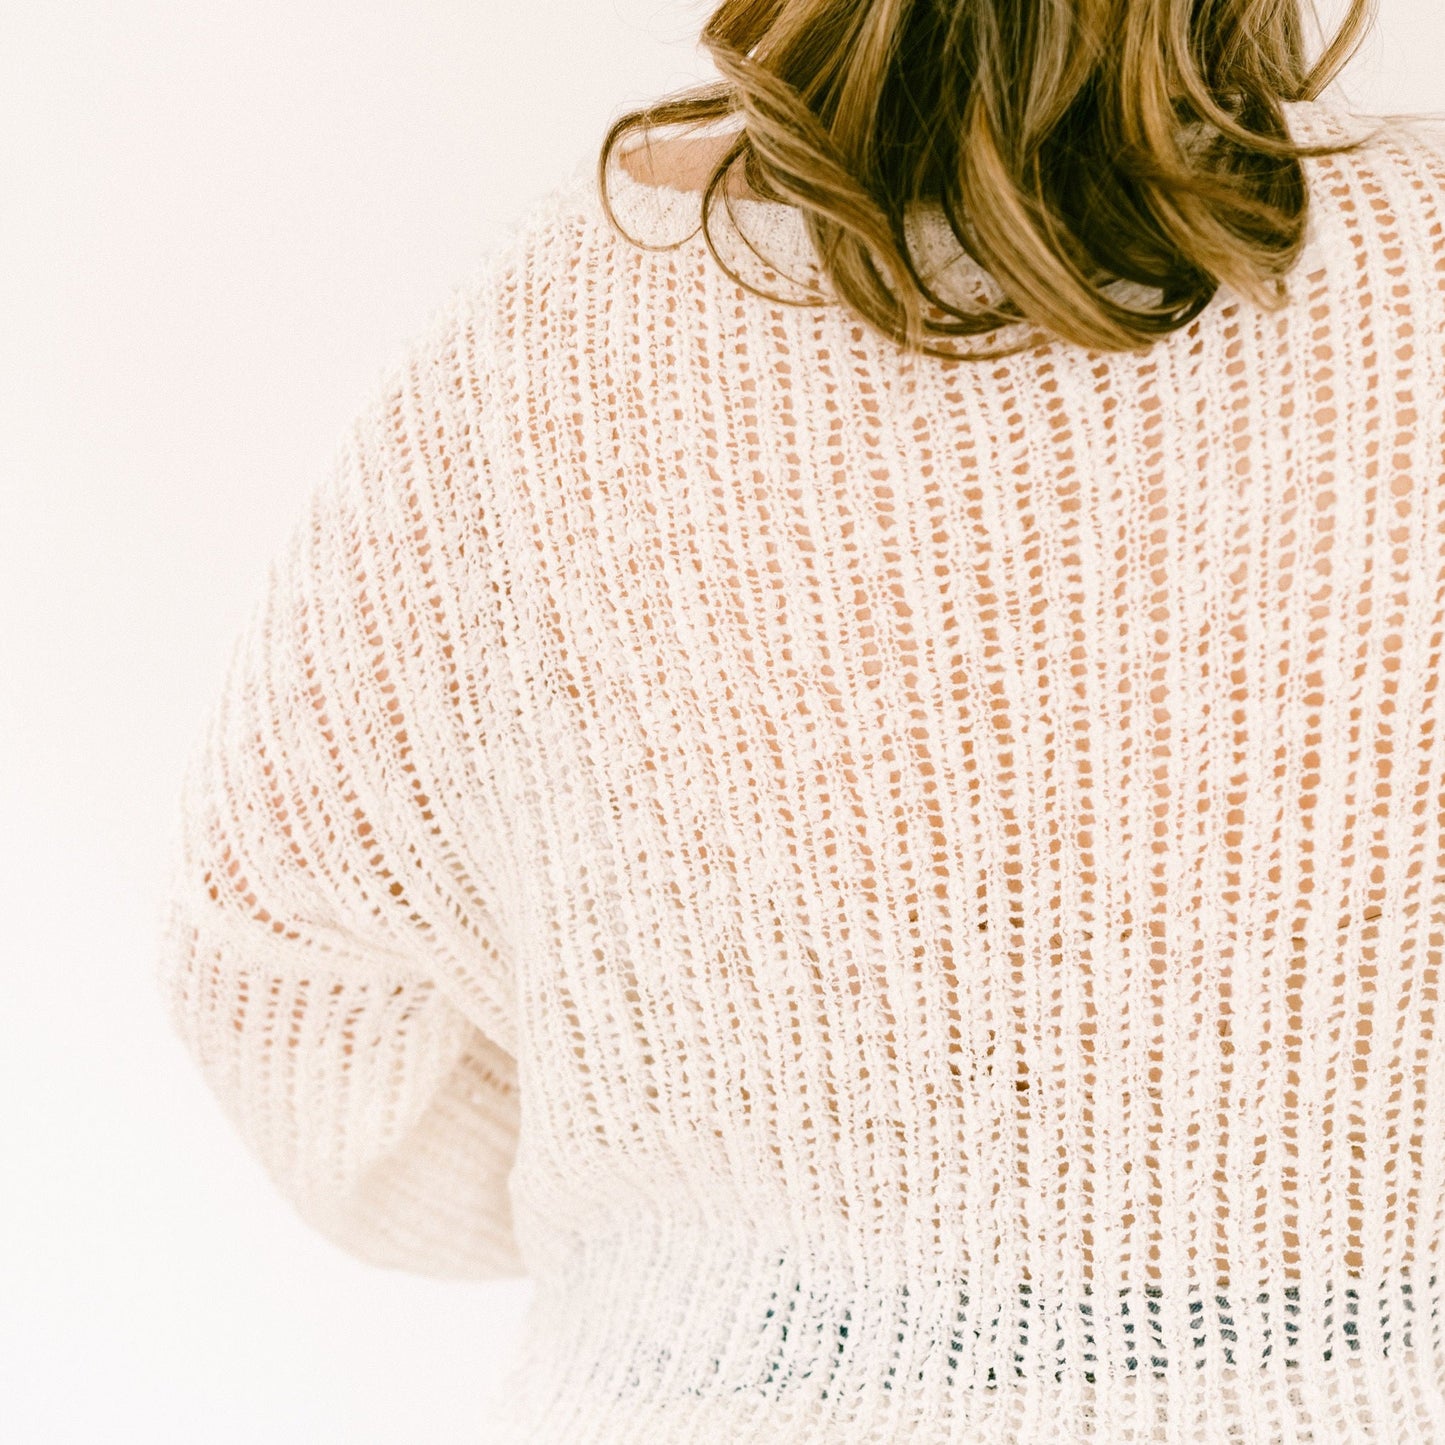 Cream Sheer Knit Pullover Sweater